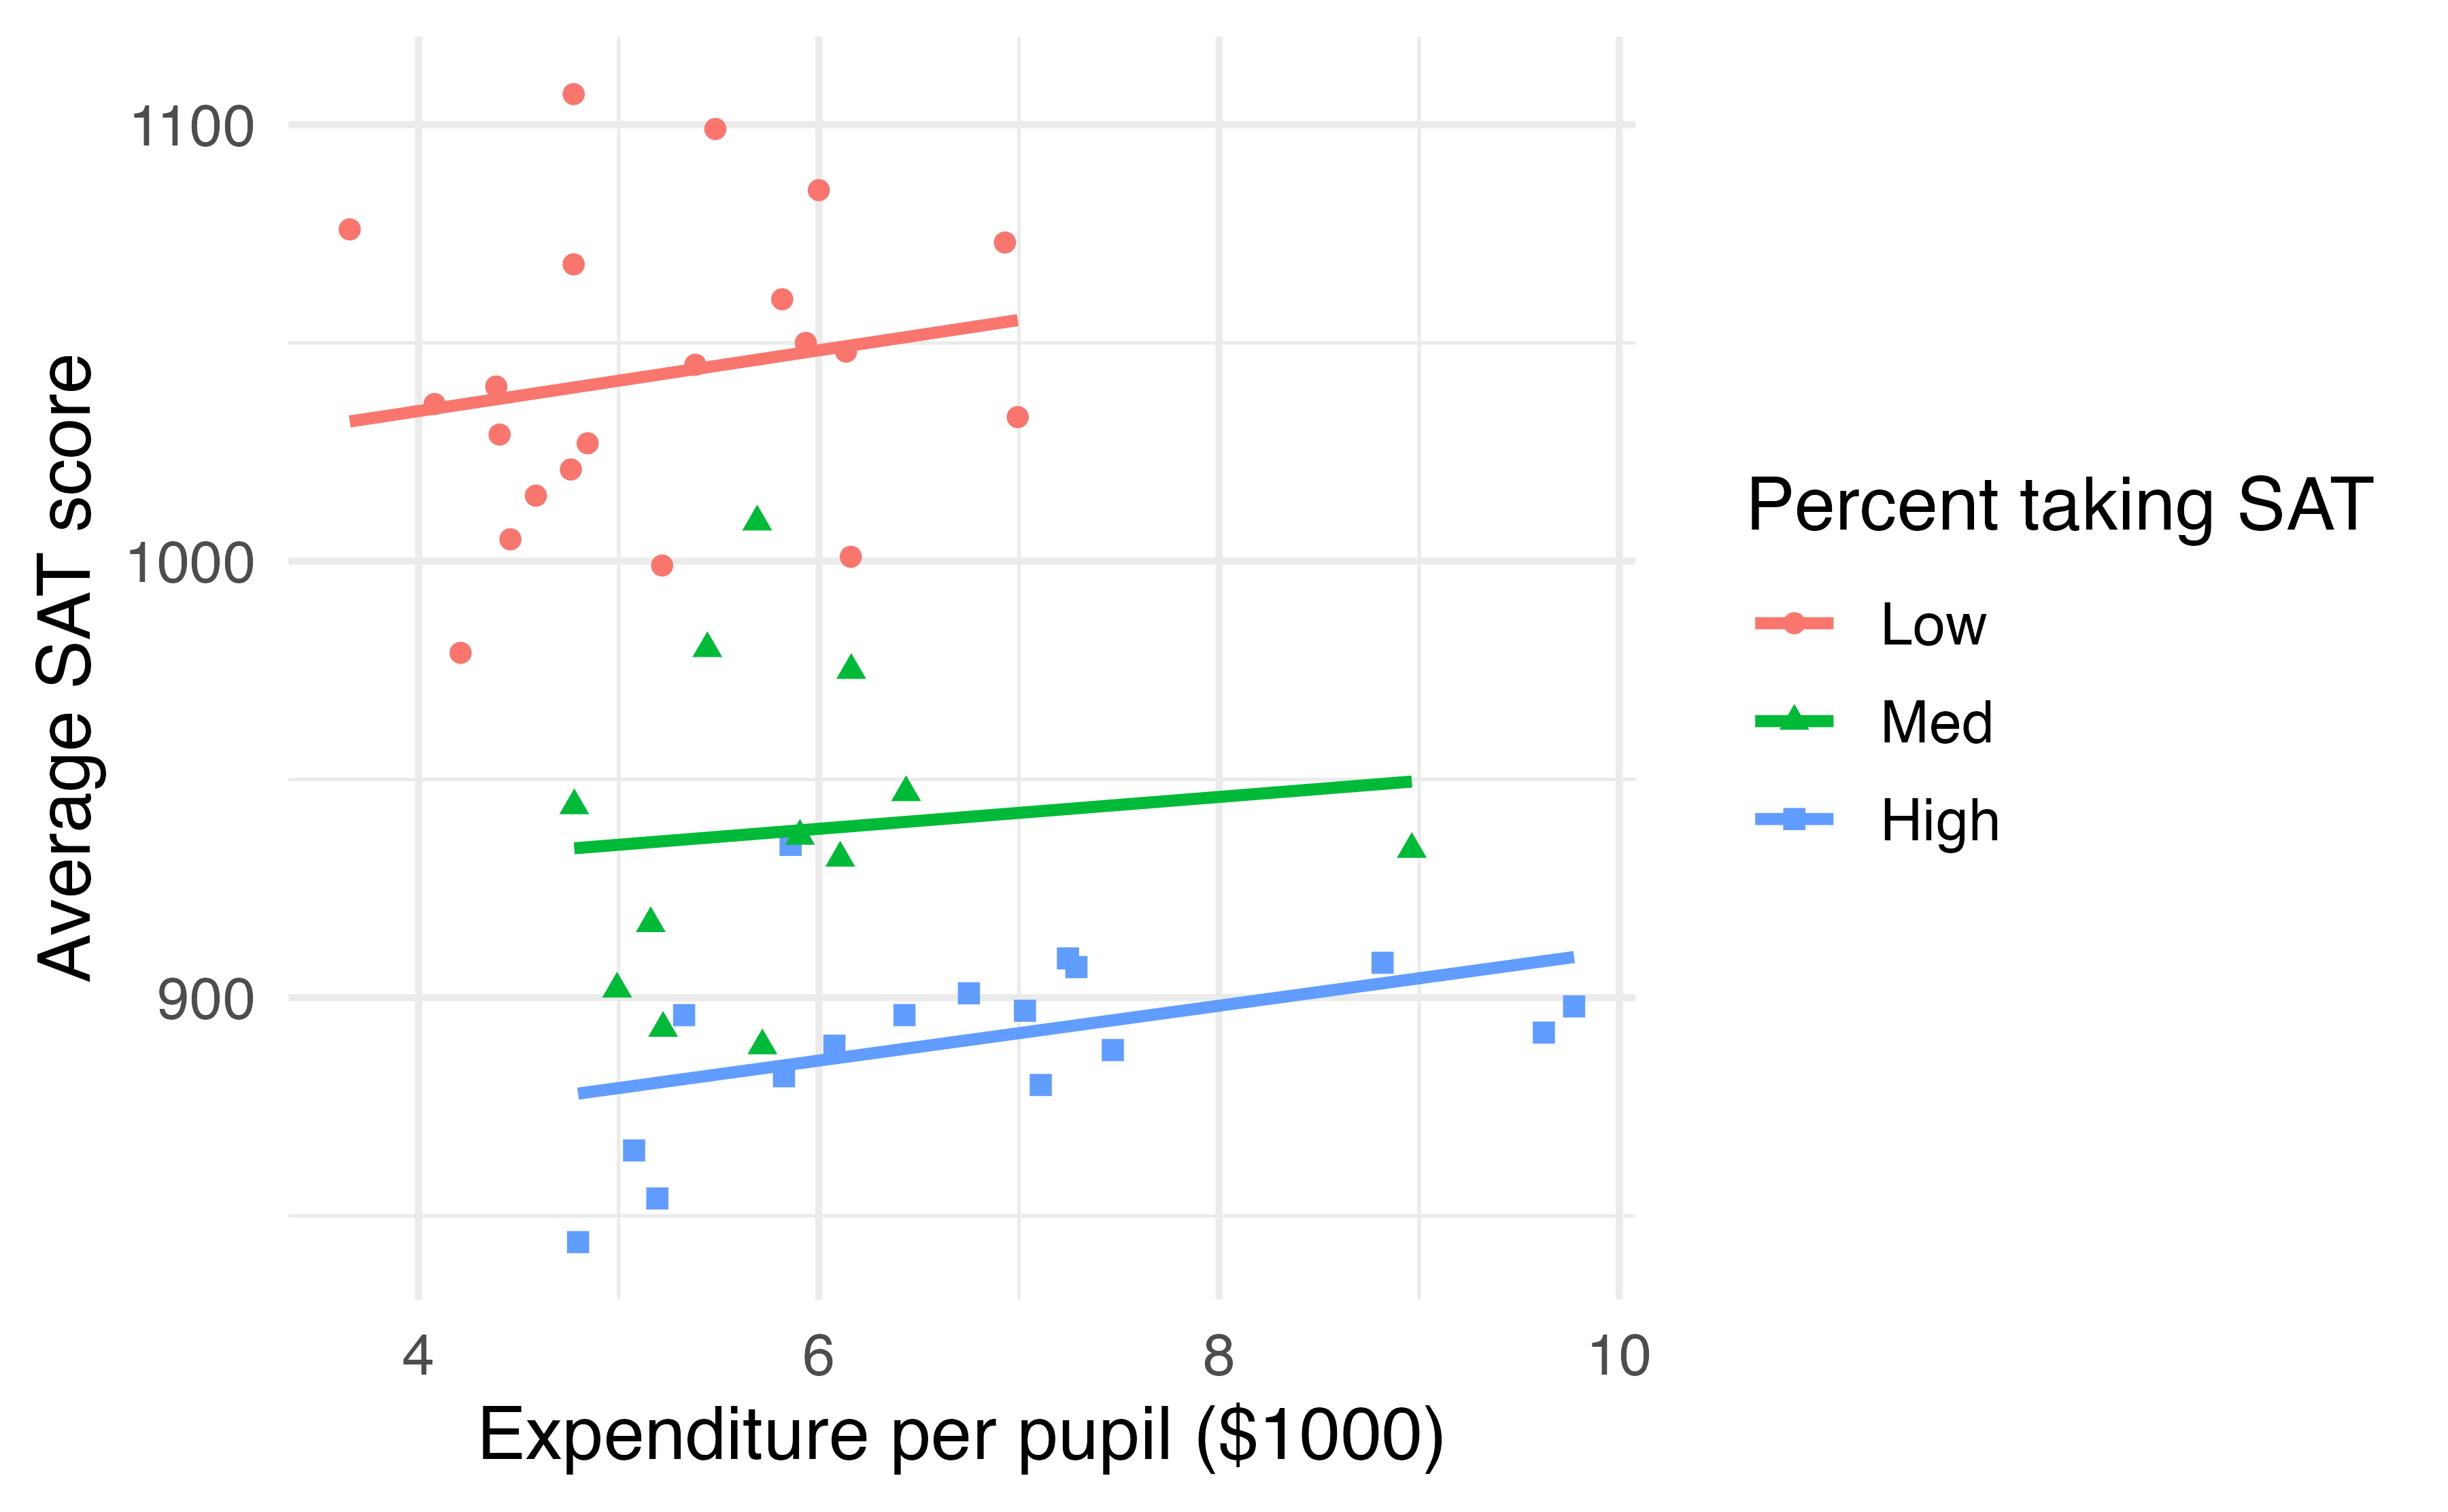 Average SAT score plotted against school expenditures per pupil, categorized by a Low ($<$ 15%), Medium (15-55%), or High ($>$ 55%) percent of students taking the SAT.